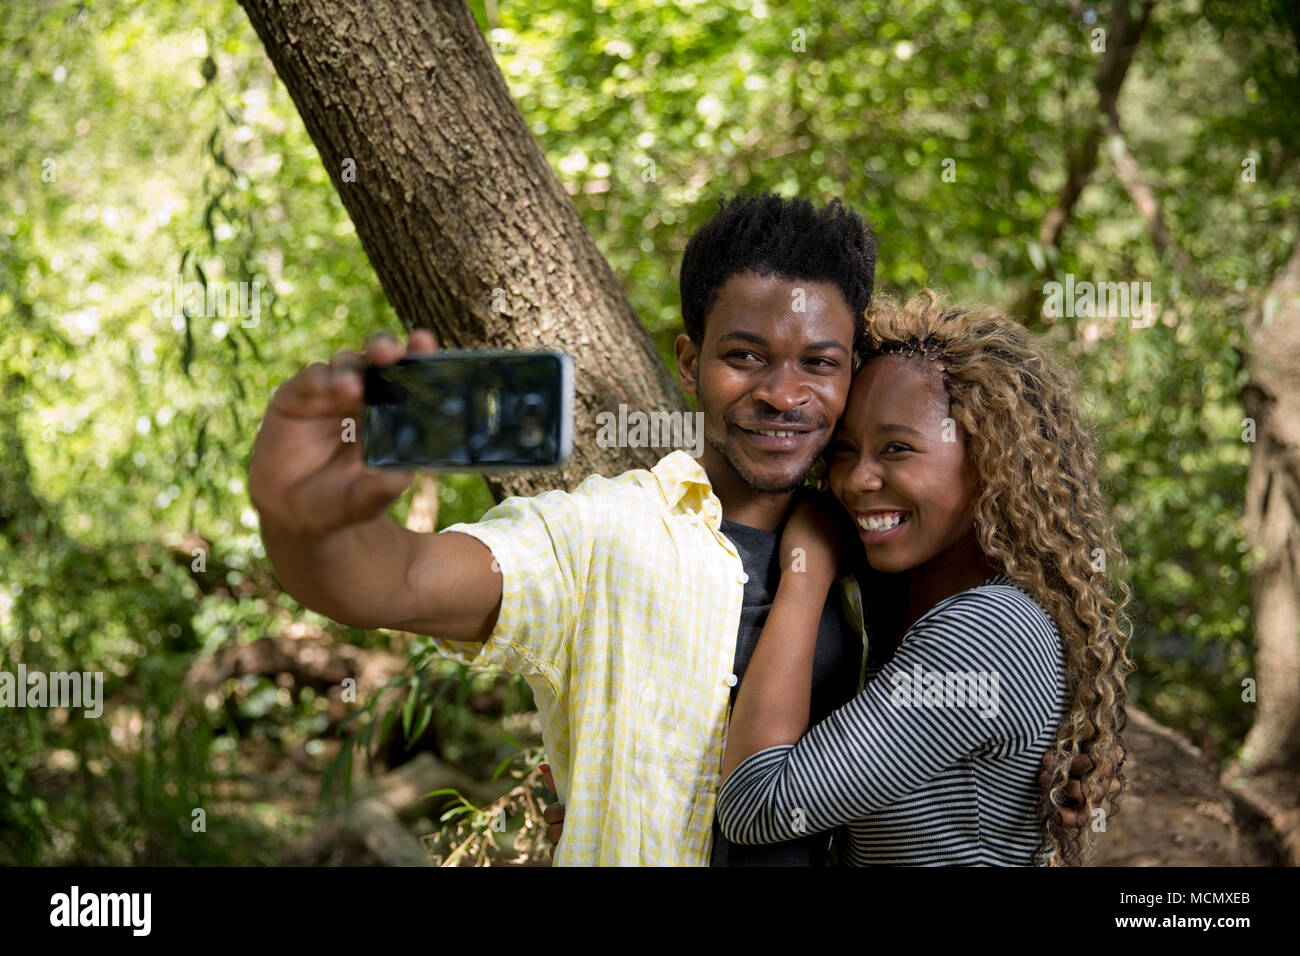 Couple taking a selfie in a park Stock Photo